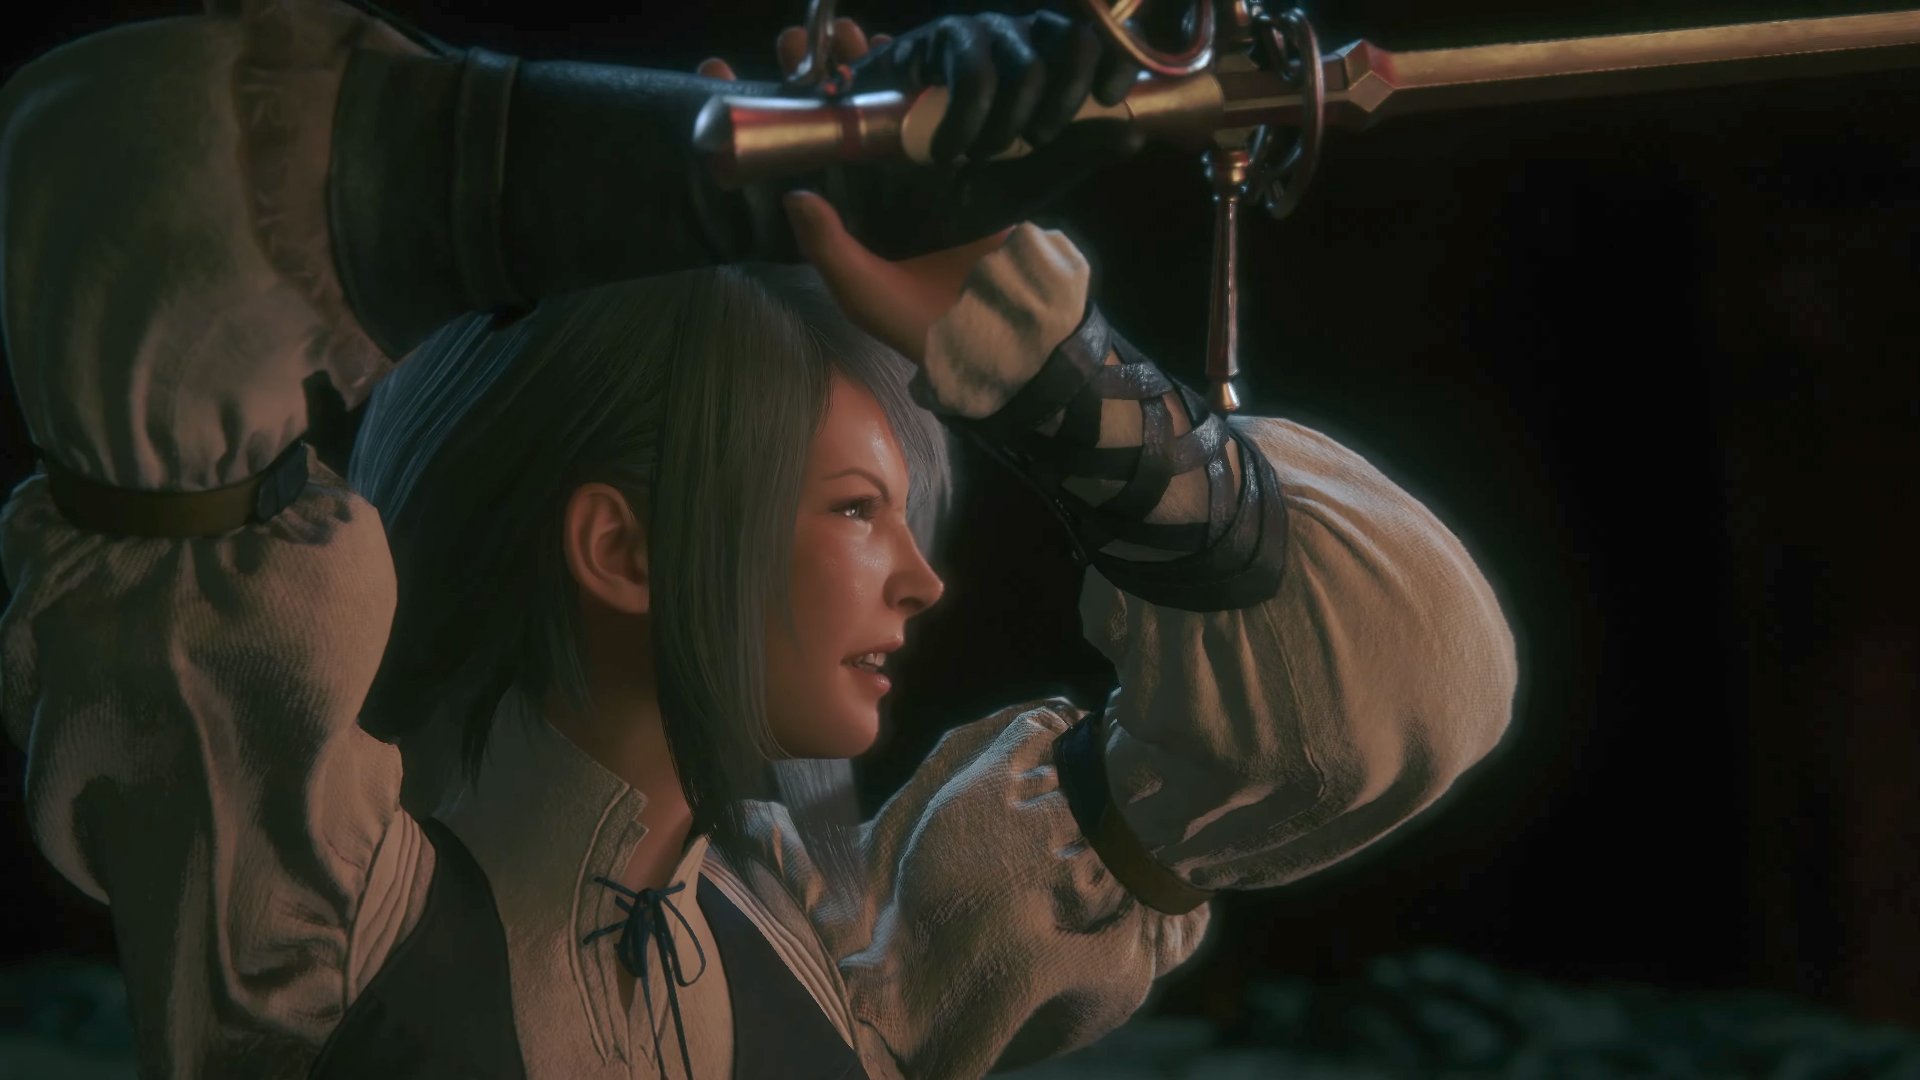 Final Fantasy 16 has been rated in Brazil, suggesting
release news could come soon